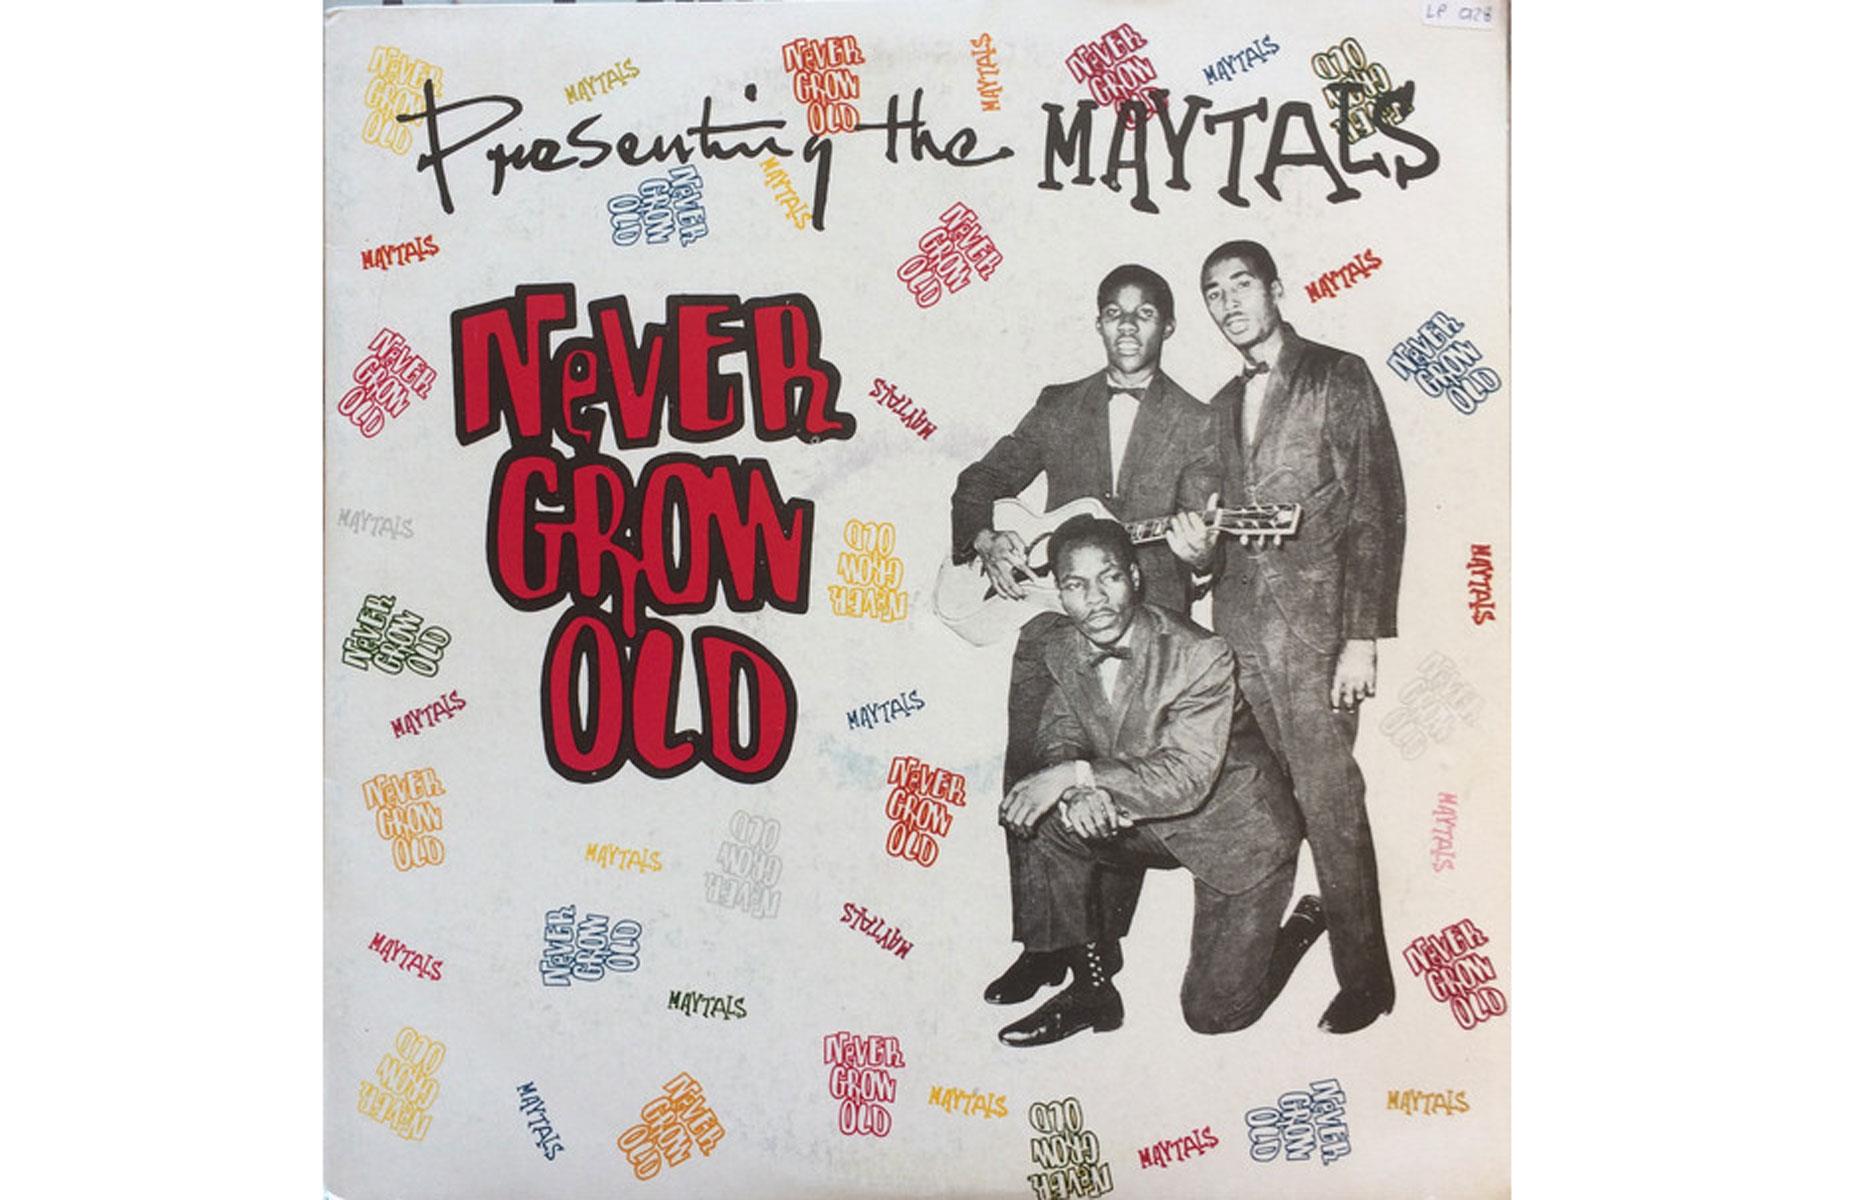 Maytals – Never Grow Old: up to £2,800 